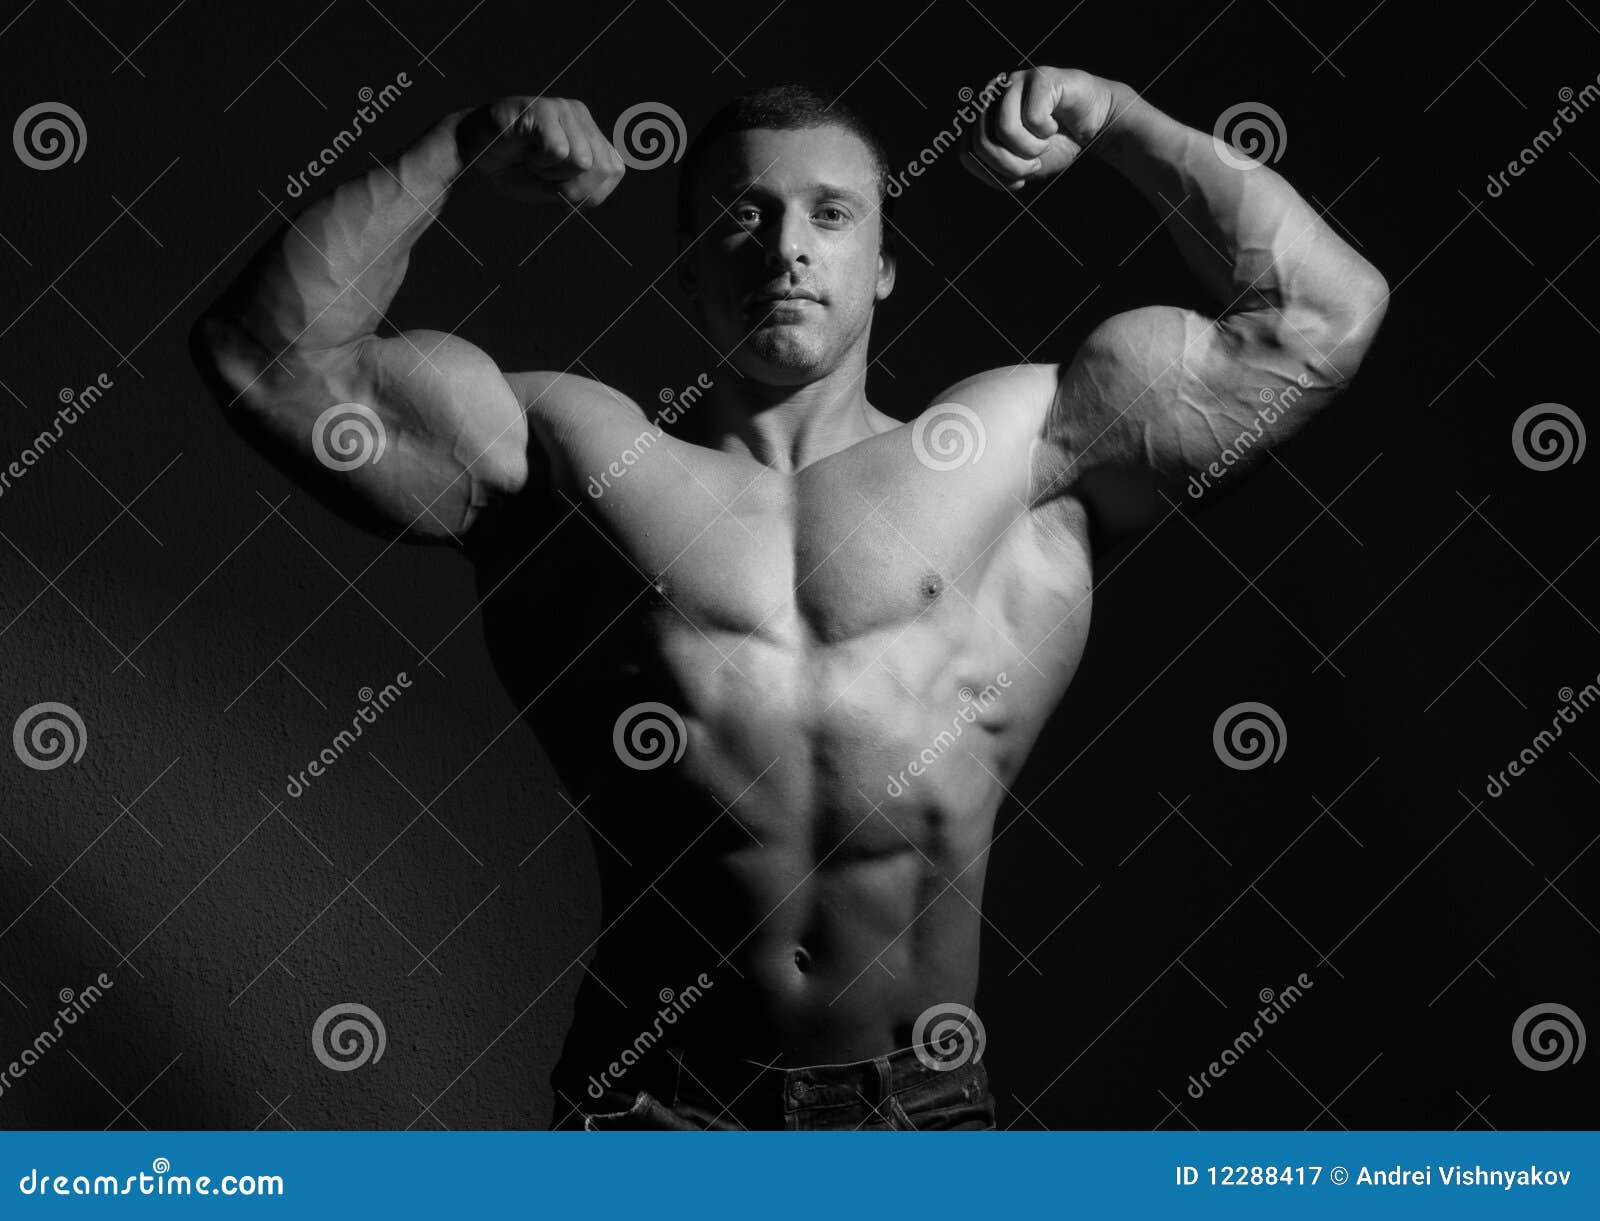 Muscle male model stock image. Image of male, young, macho - 12288417